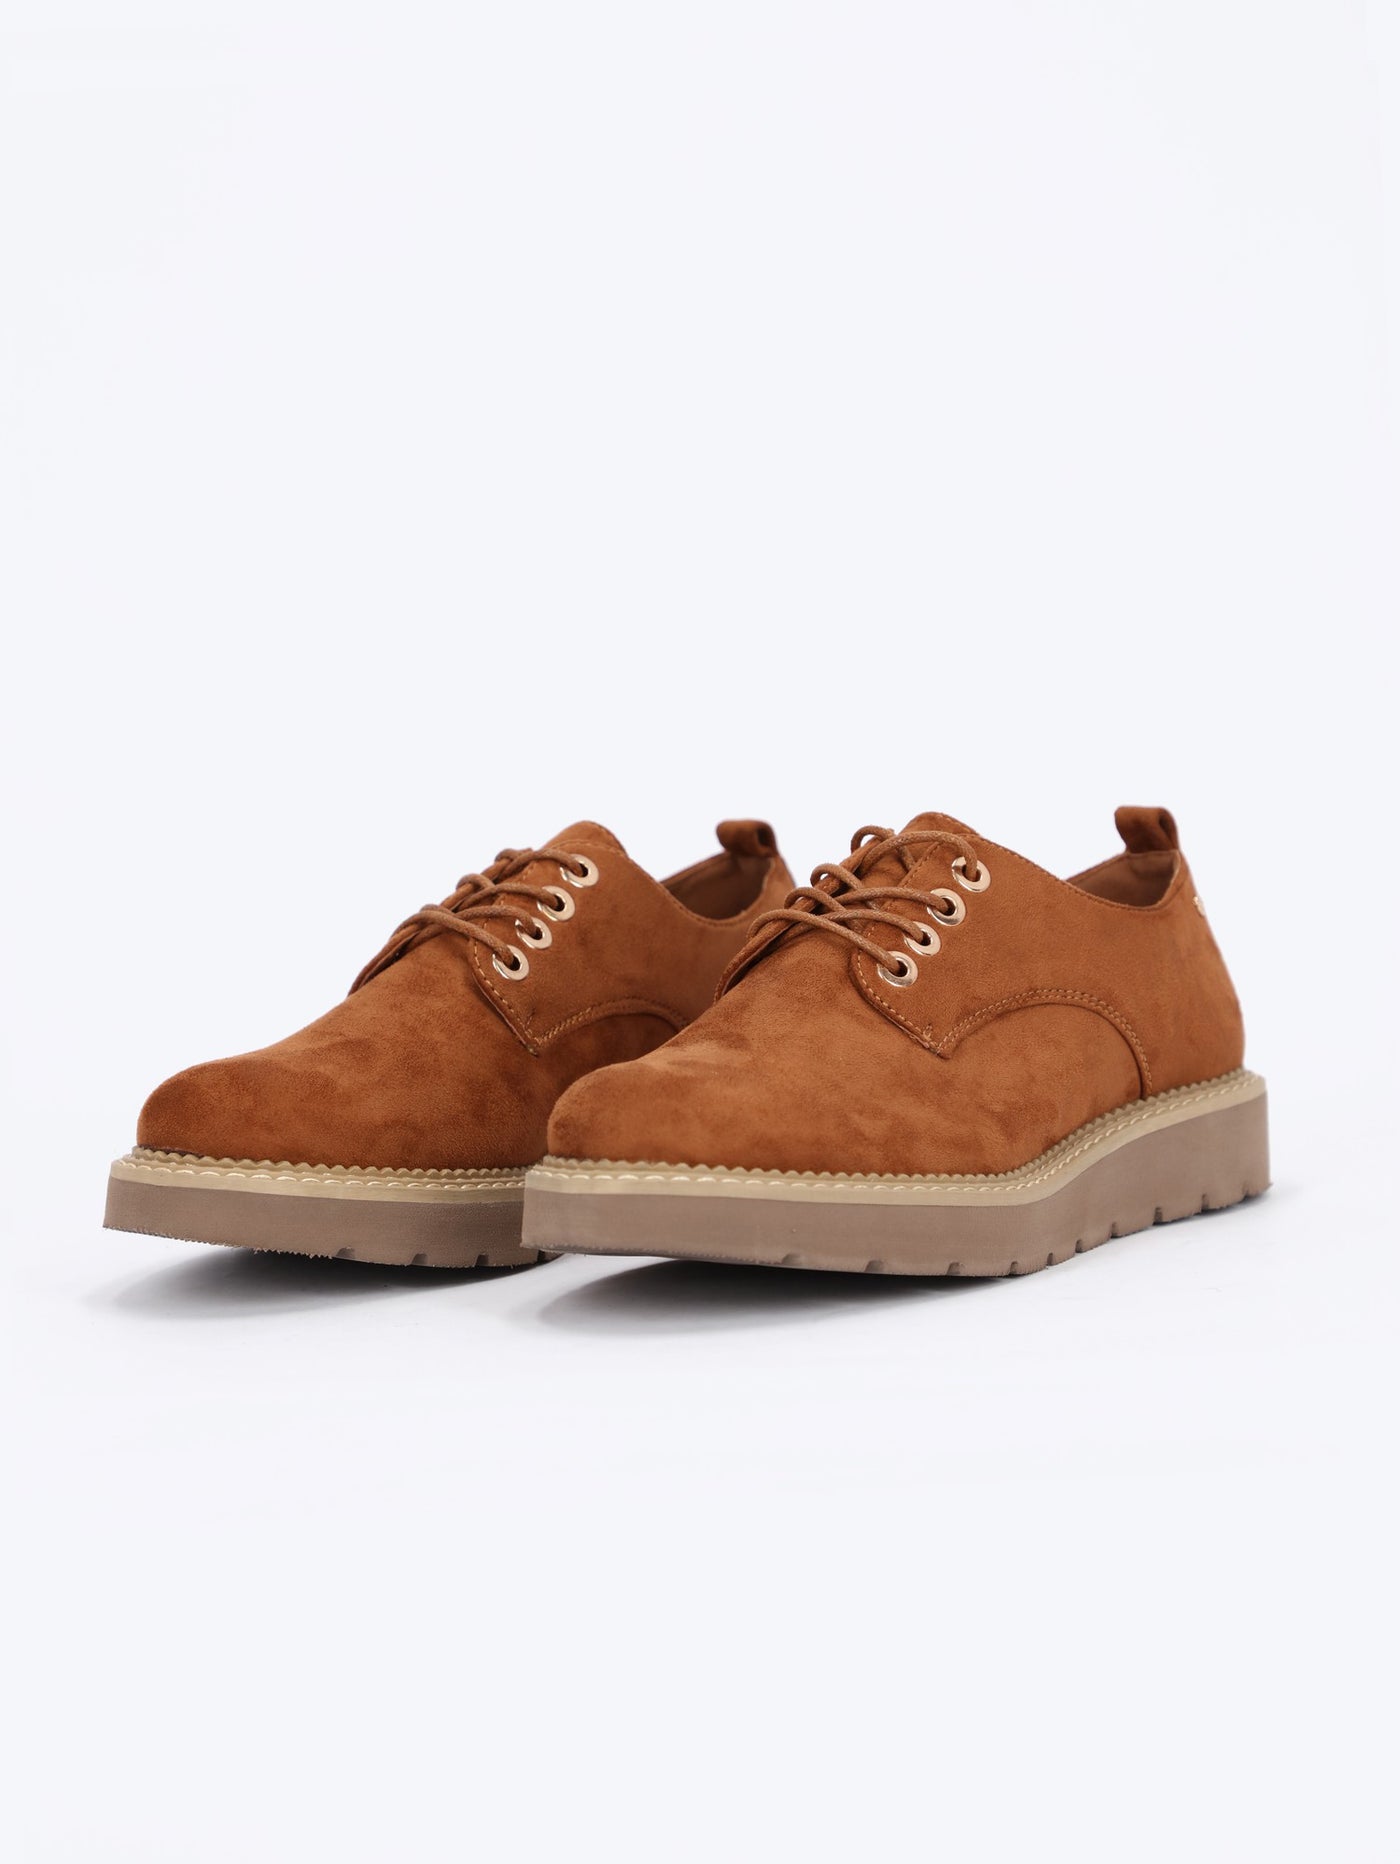 Lace-up Front Classic Oxford shoes